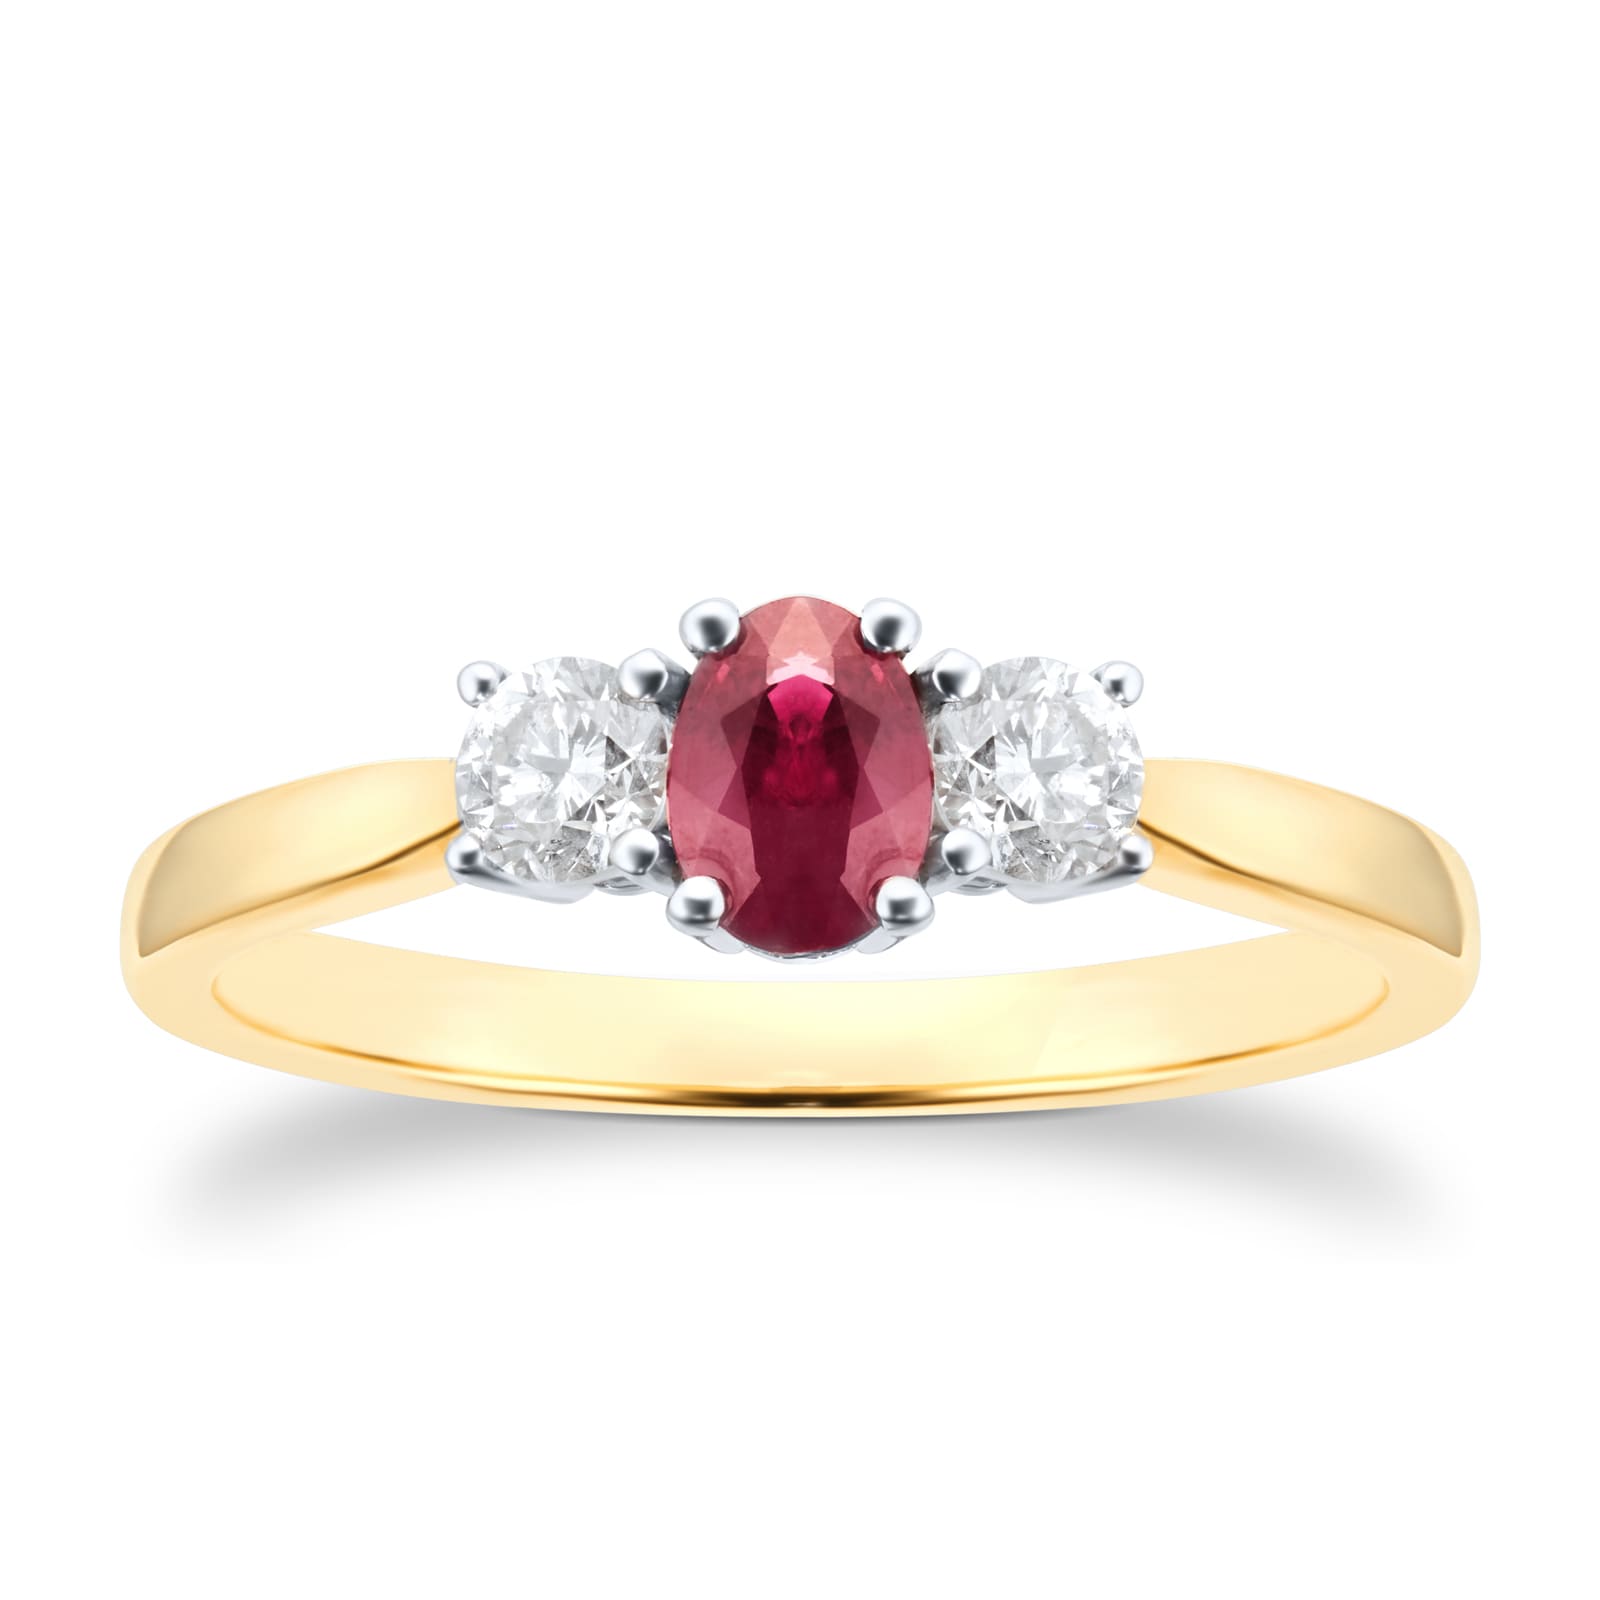 9ct Yellow and White Gold 3 Stone Ruby & Diamond Ring - Ring Size K